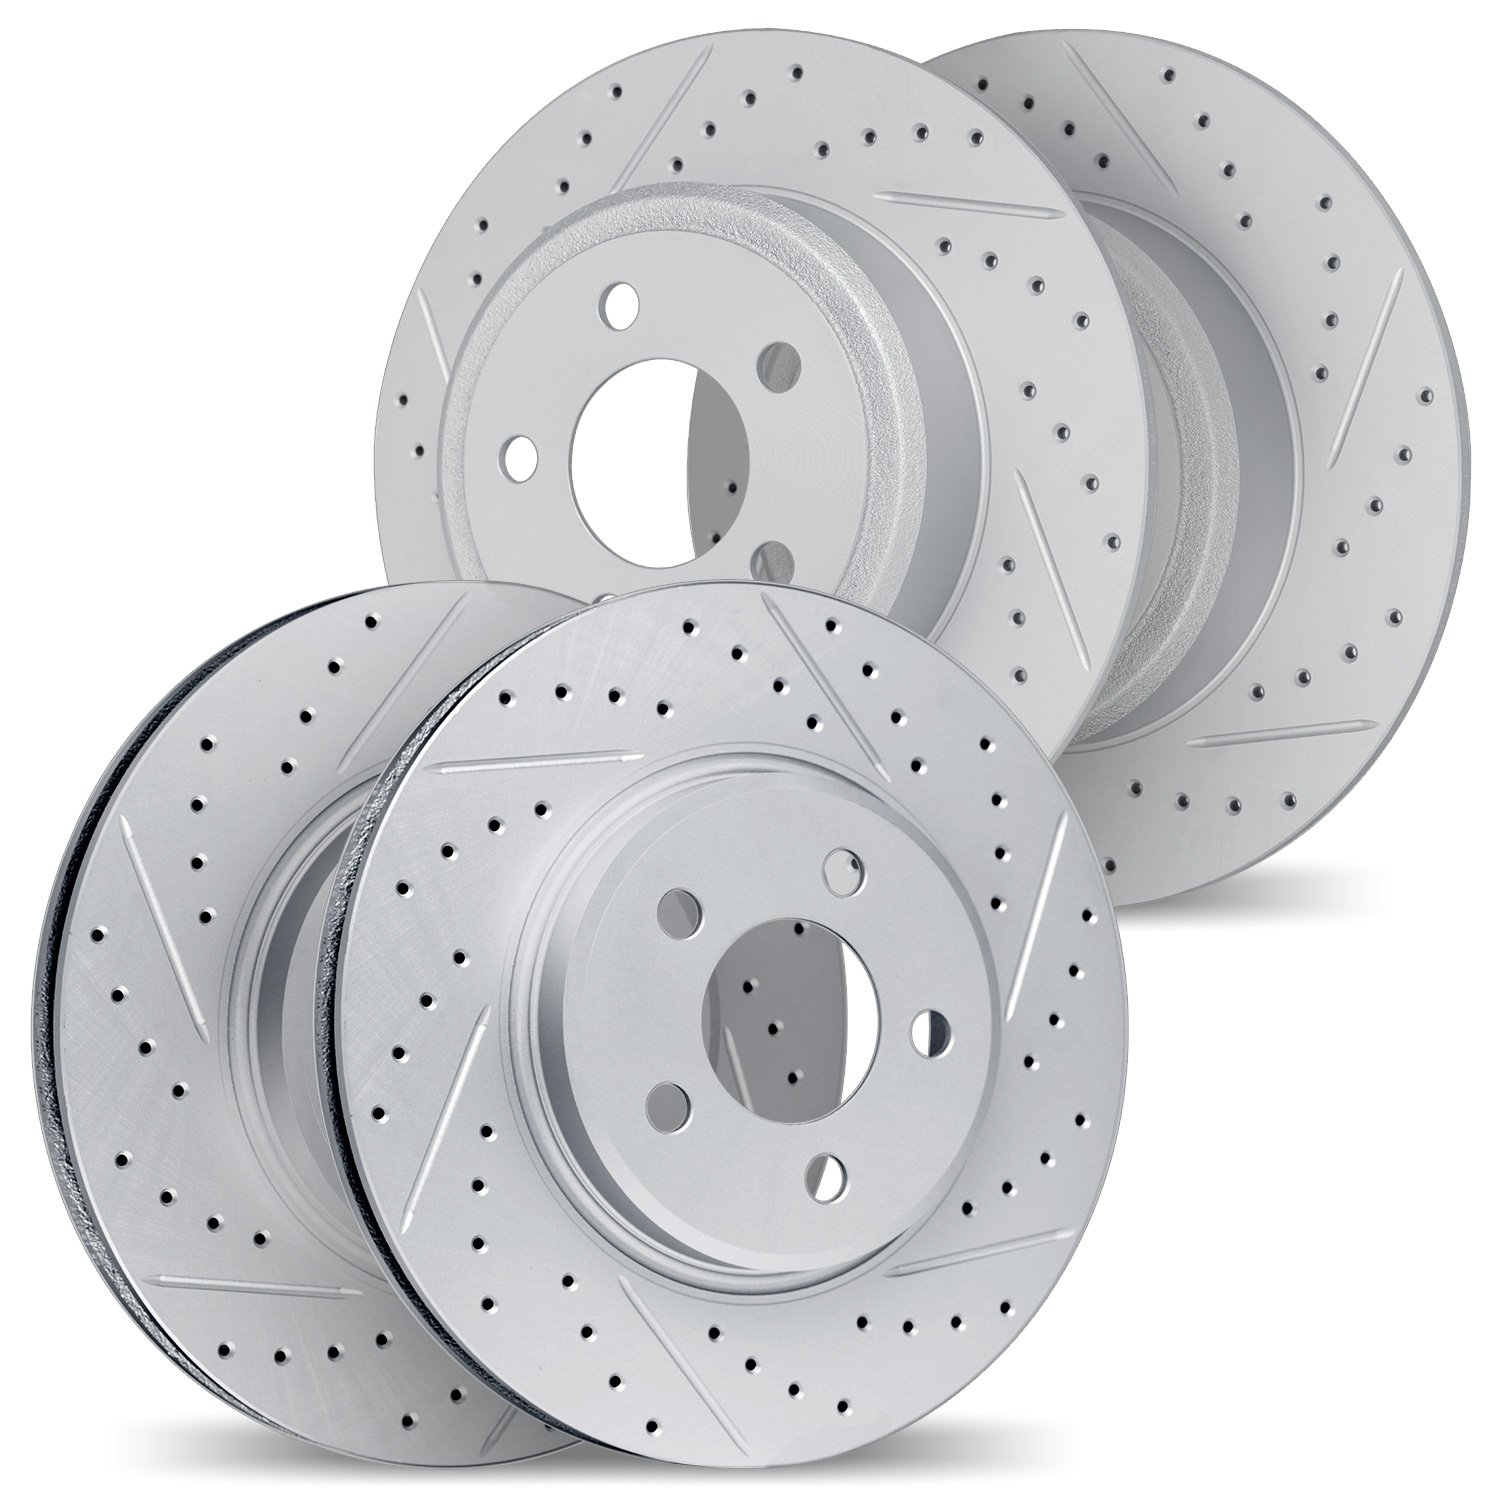 2004-80020 Geoperformance Drilled/Slotted Brake Rotors, 2016-2018 Ford/Lincoln/Mercury/Mazda, Position: Front and Rear